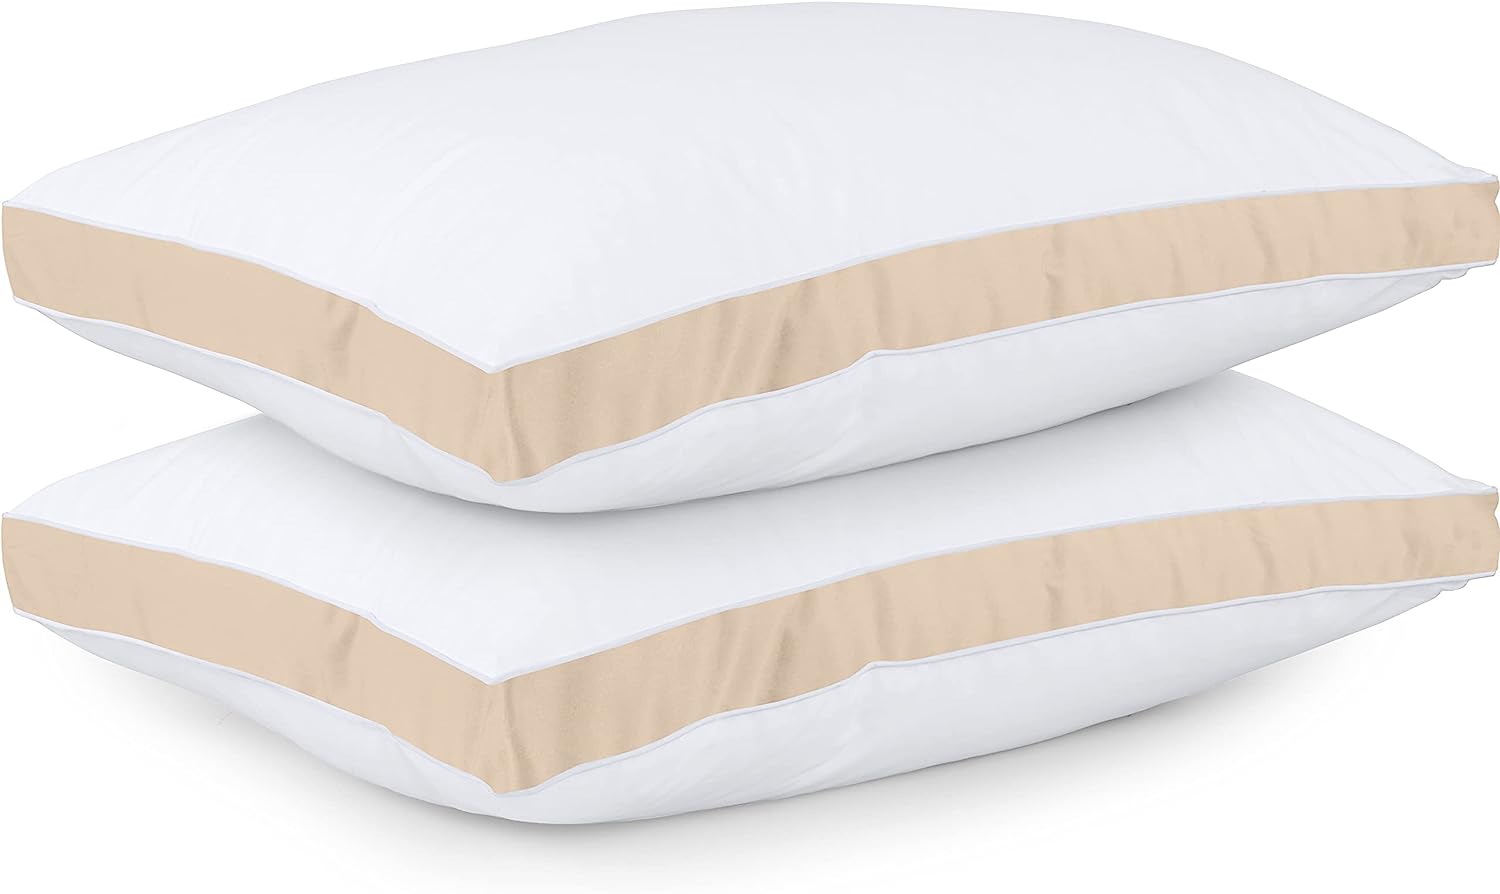 Utopia Bedding Bed Pillows for Sleeping King Size (White), Set of 2,  Cooling Hotel Quality, Gusseted Pillow for Back, Stomach or Side Sleepers